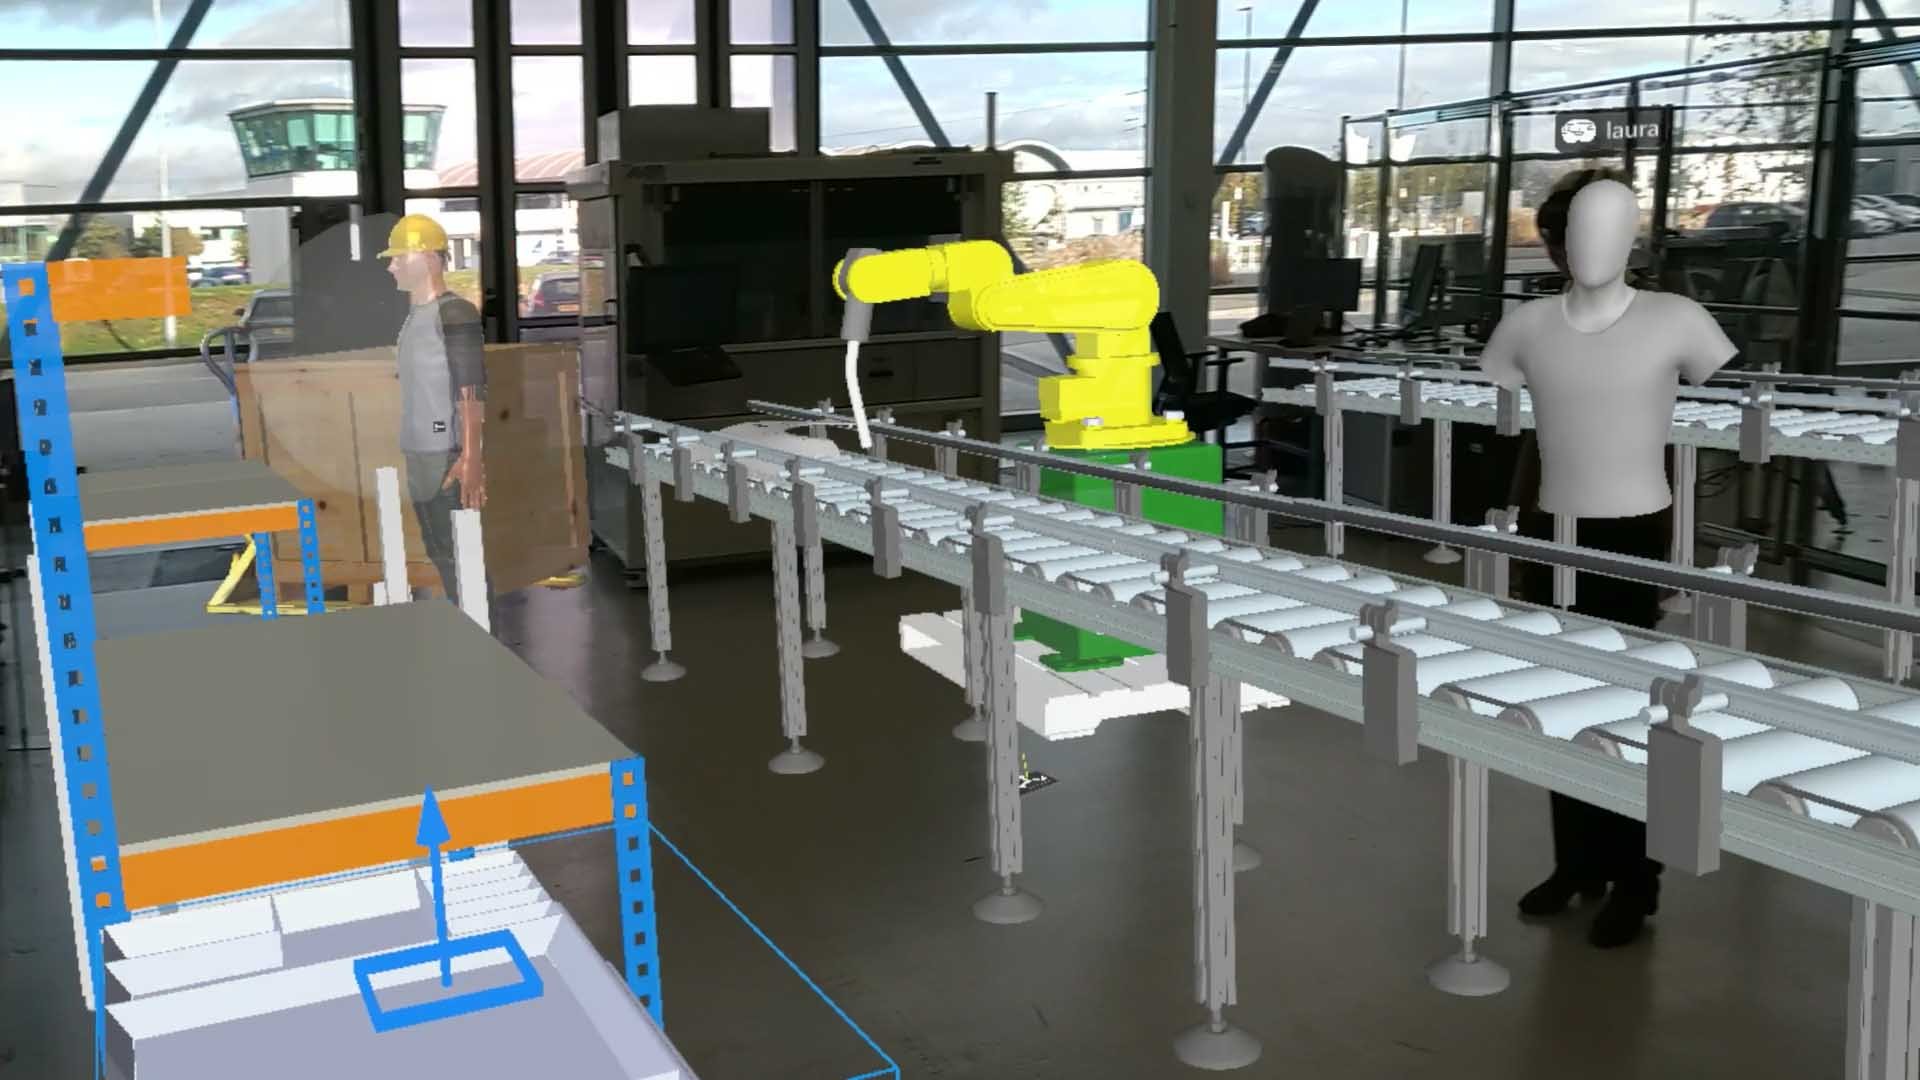 Collaborative factory layout visualization in Mixed Reality using Microsoft HoloLens 2 and TheoremXR